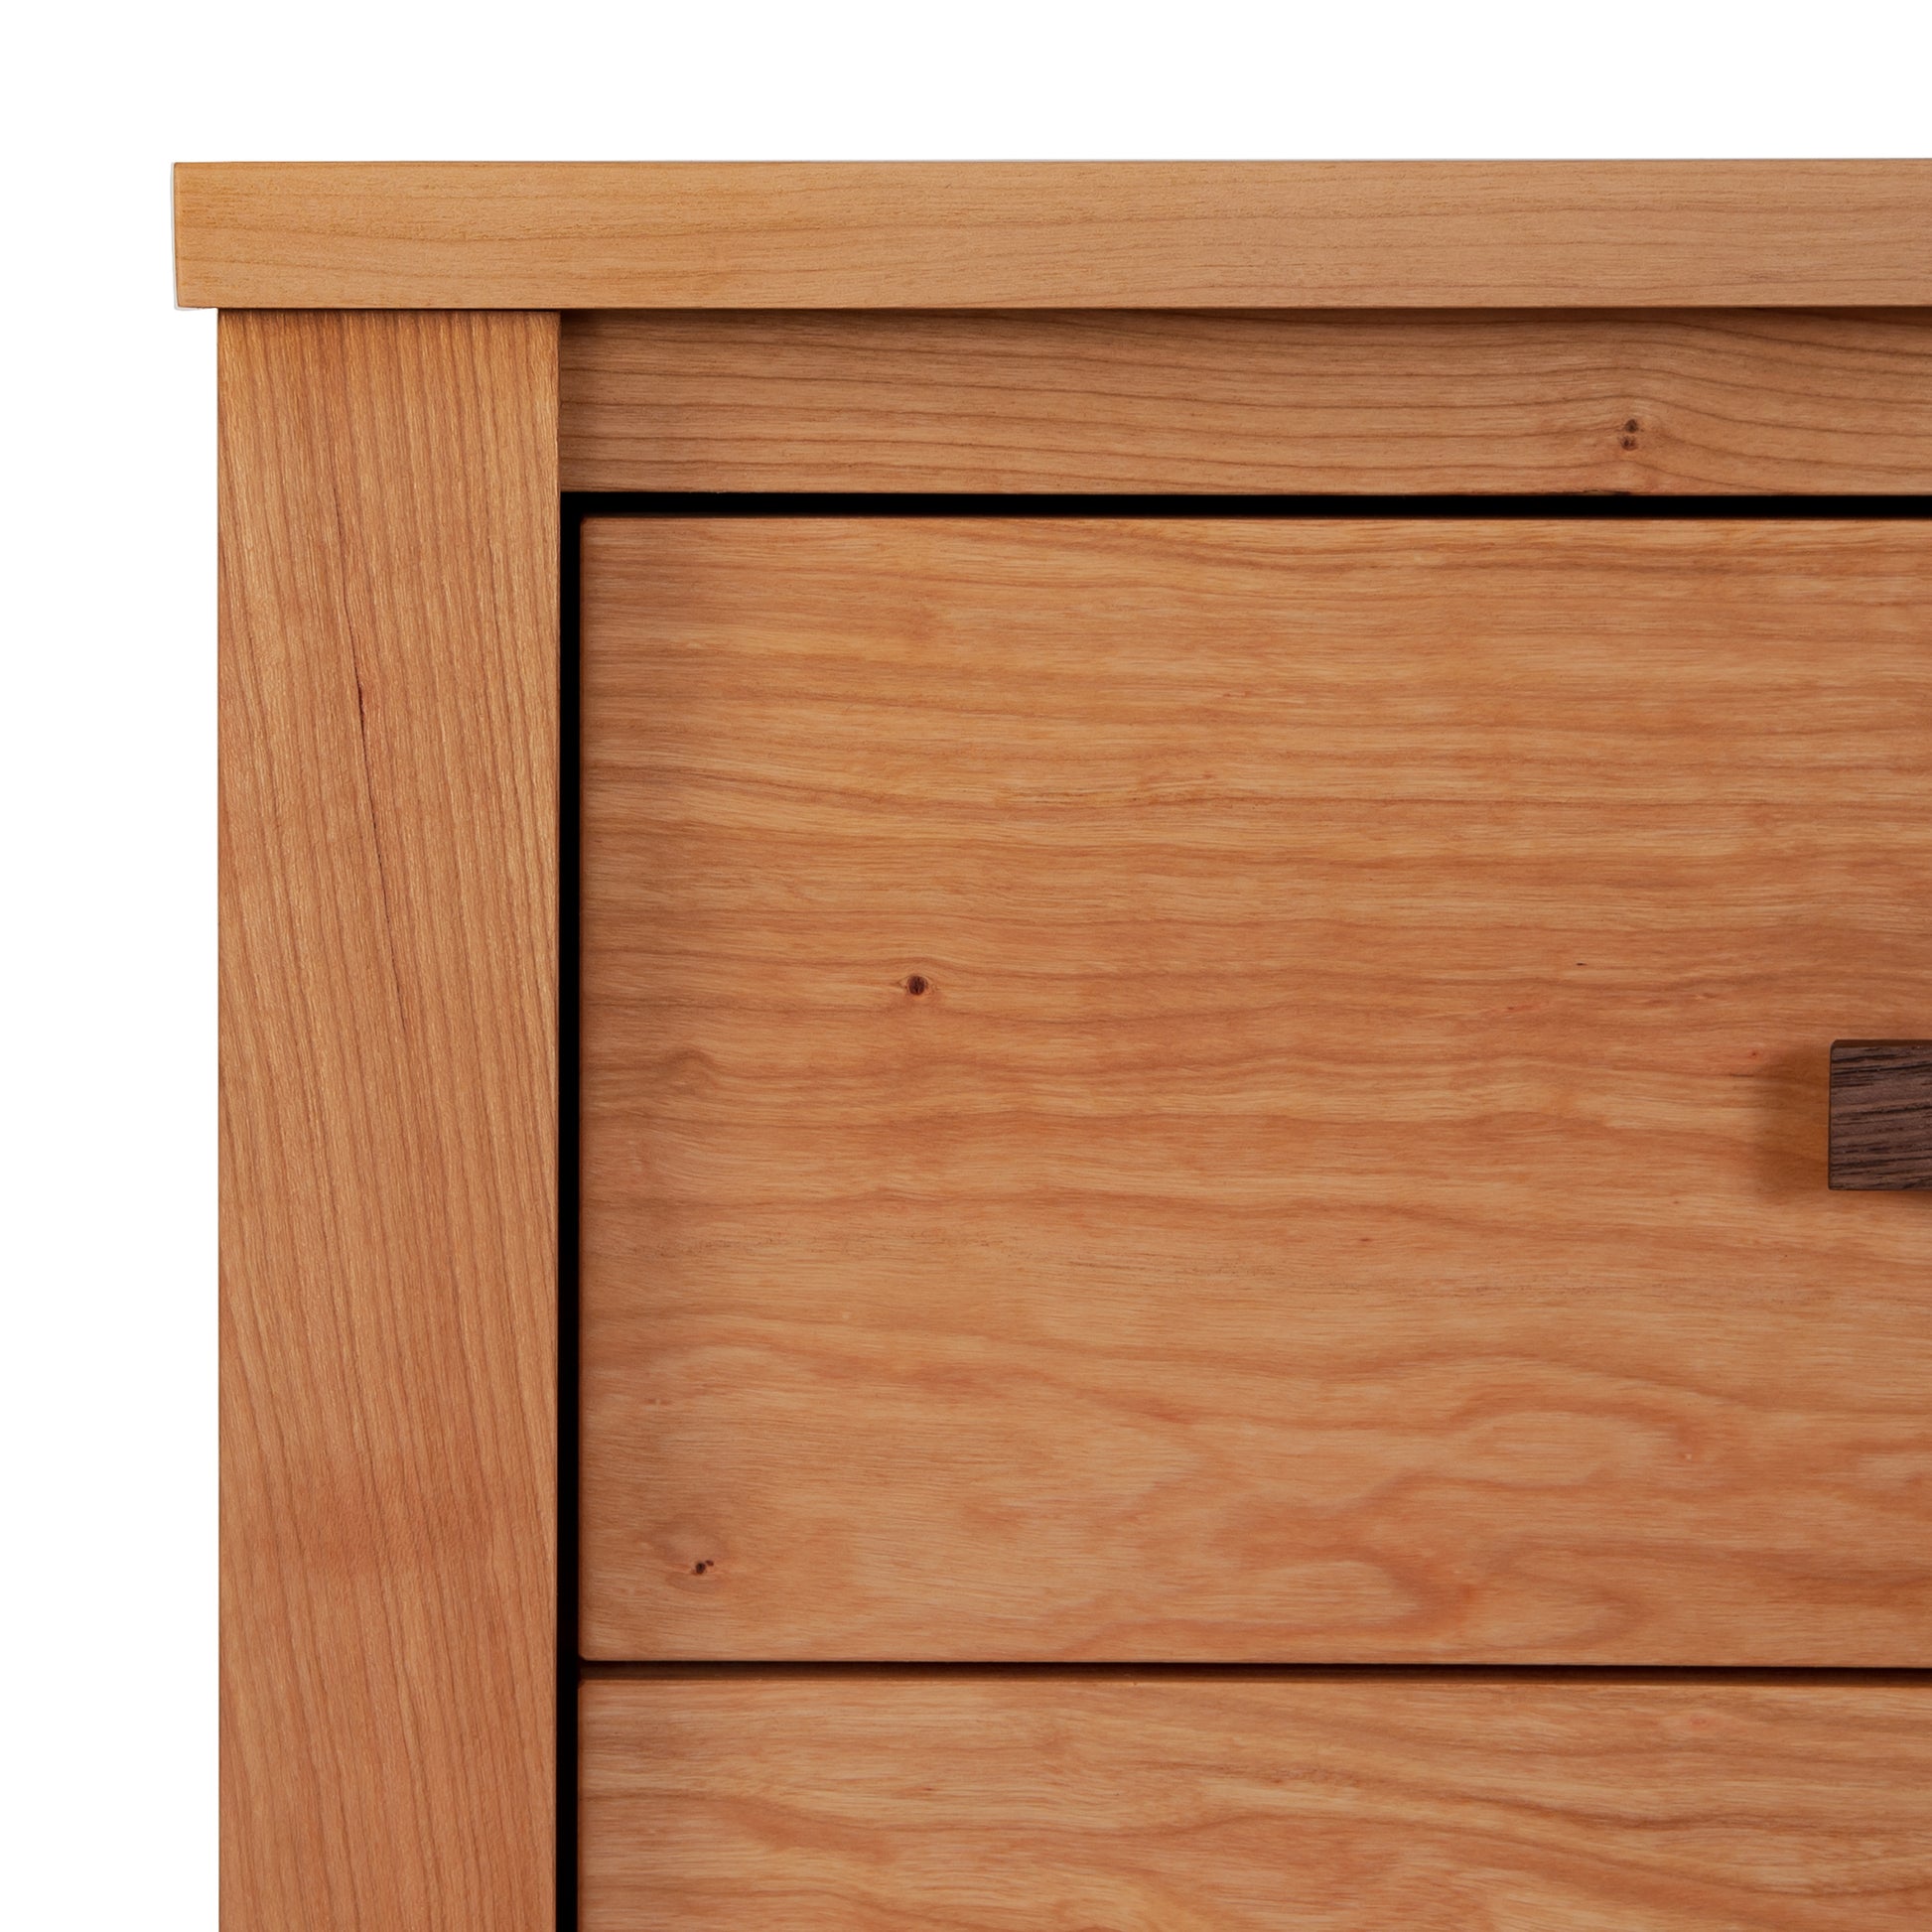 A close up of an Andover Modern 3-Drawer Nightstand with Maple Corner Woodworks craftsmanship.